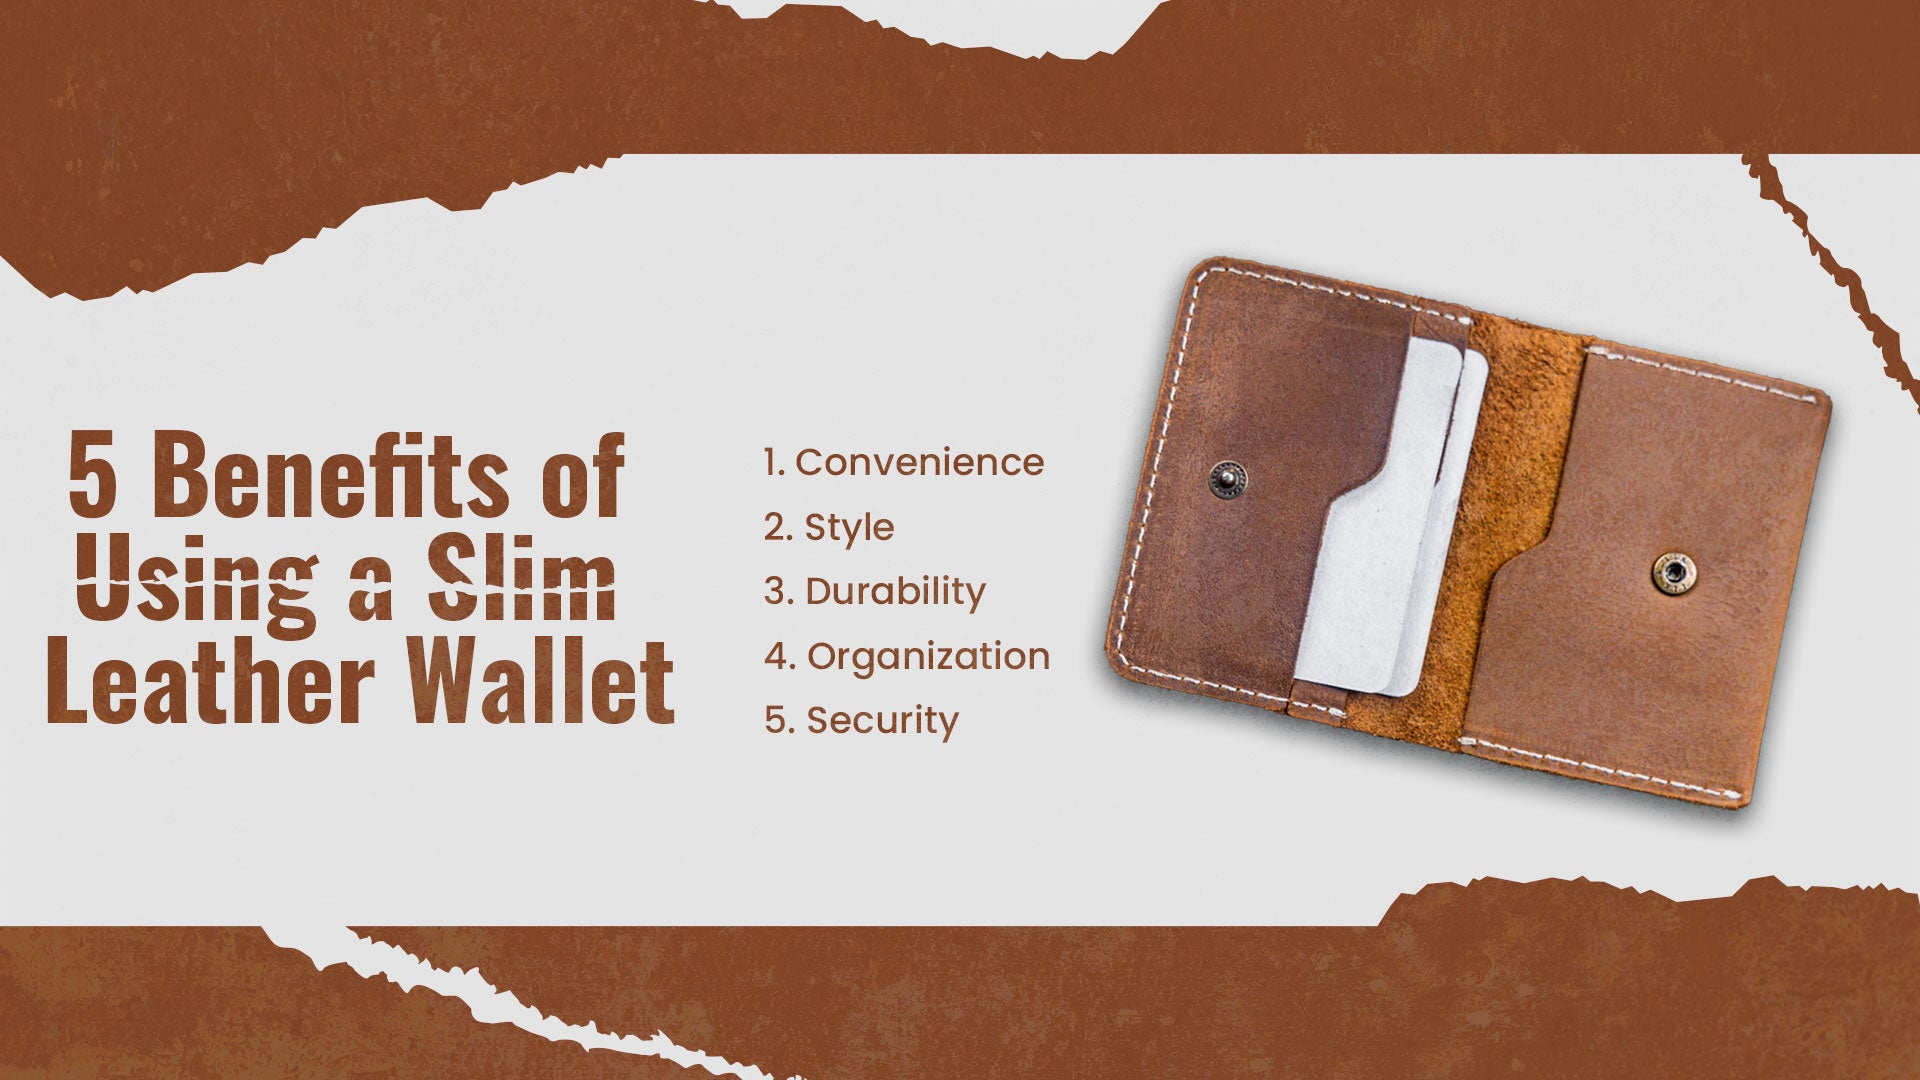 5 Benefits of Using a Slim Leather Wallet